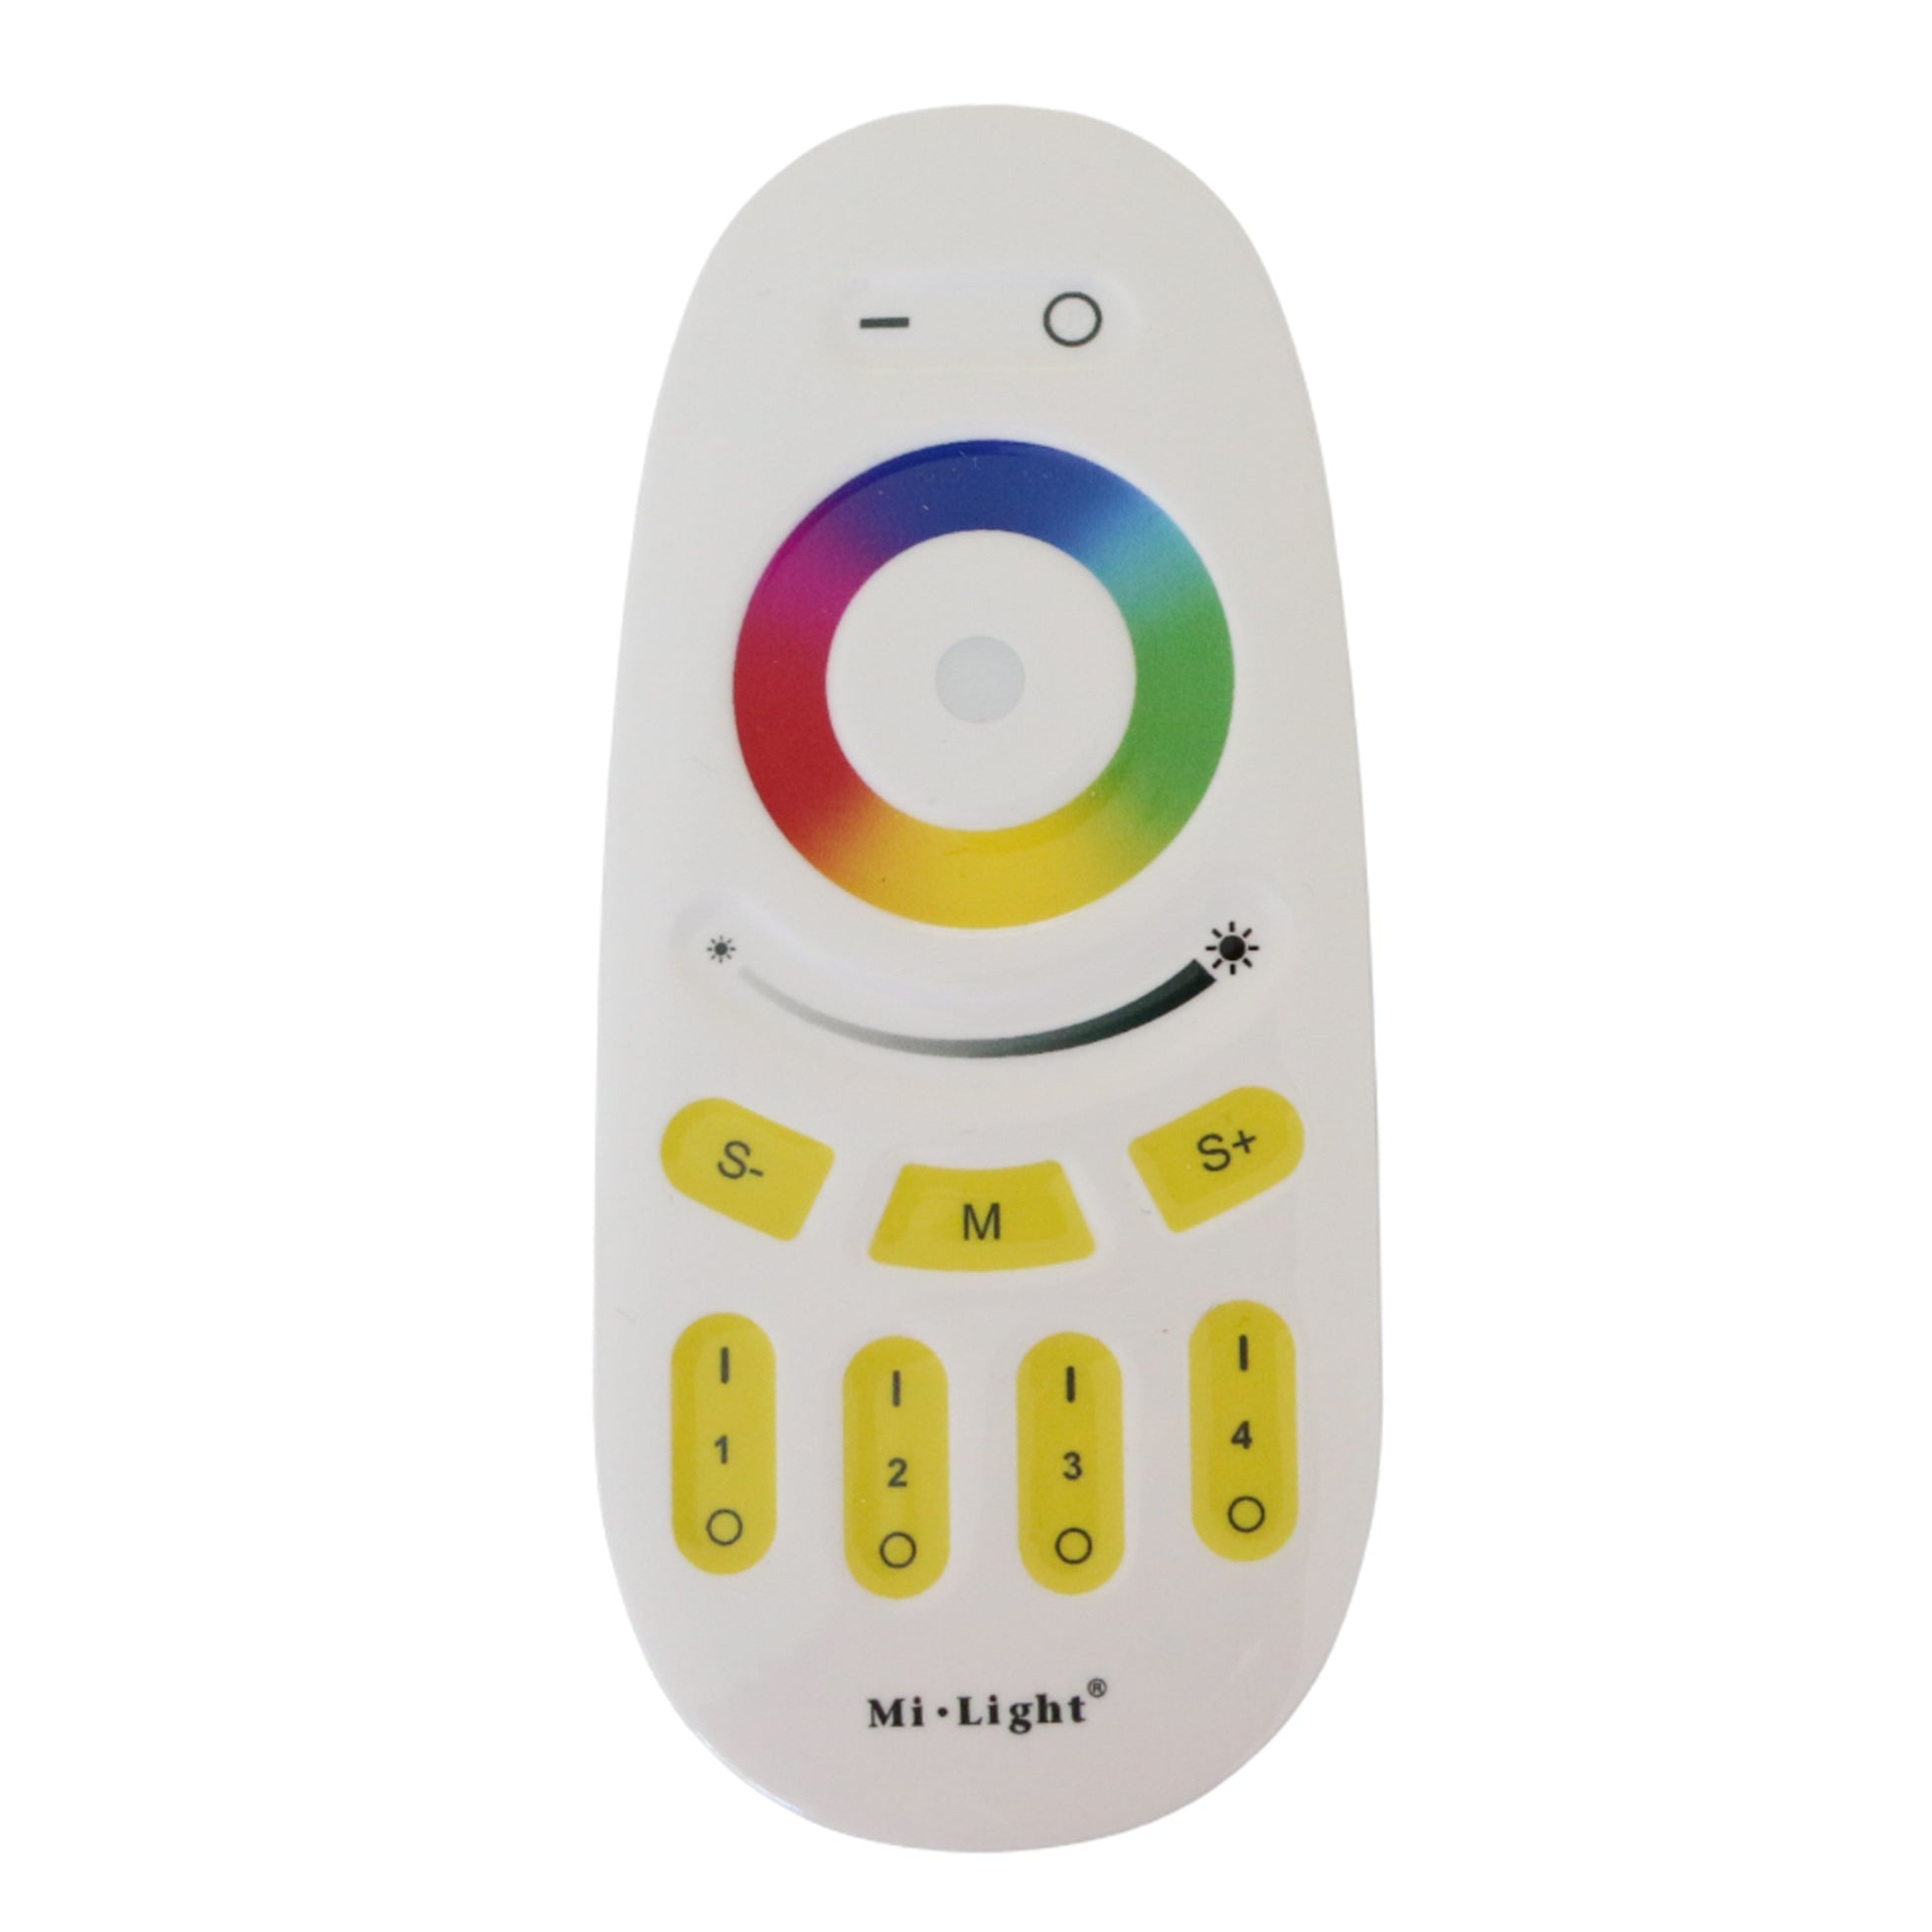 Controller and Remote for RGB LED Strip Light